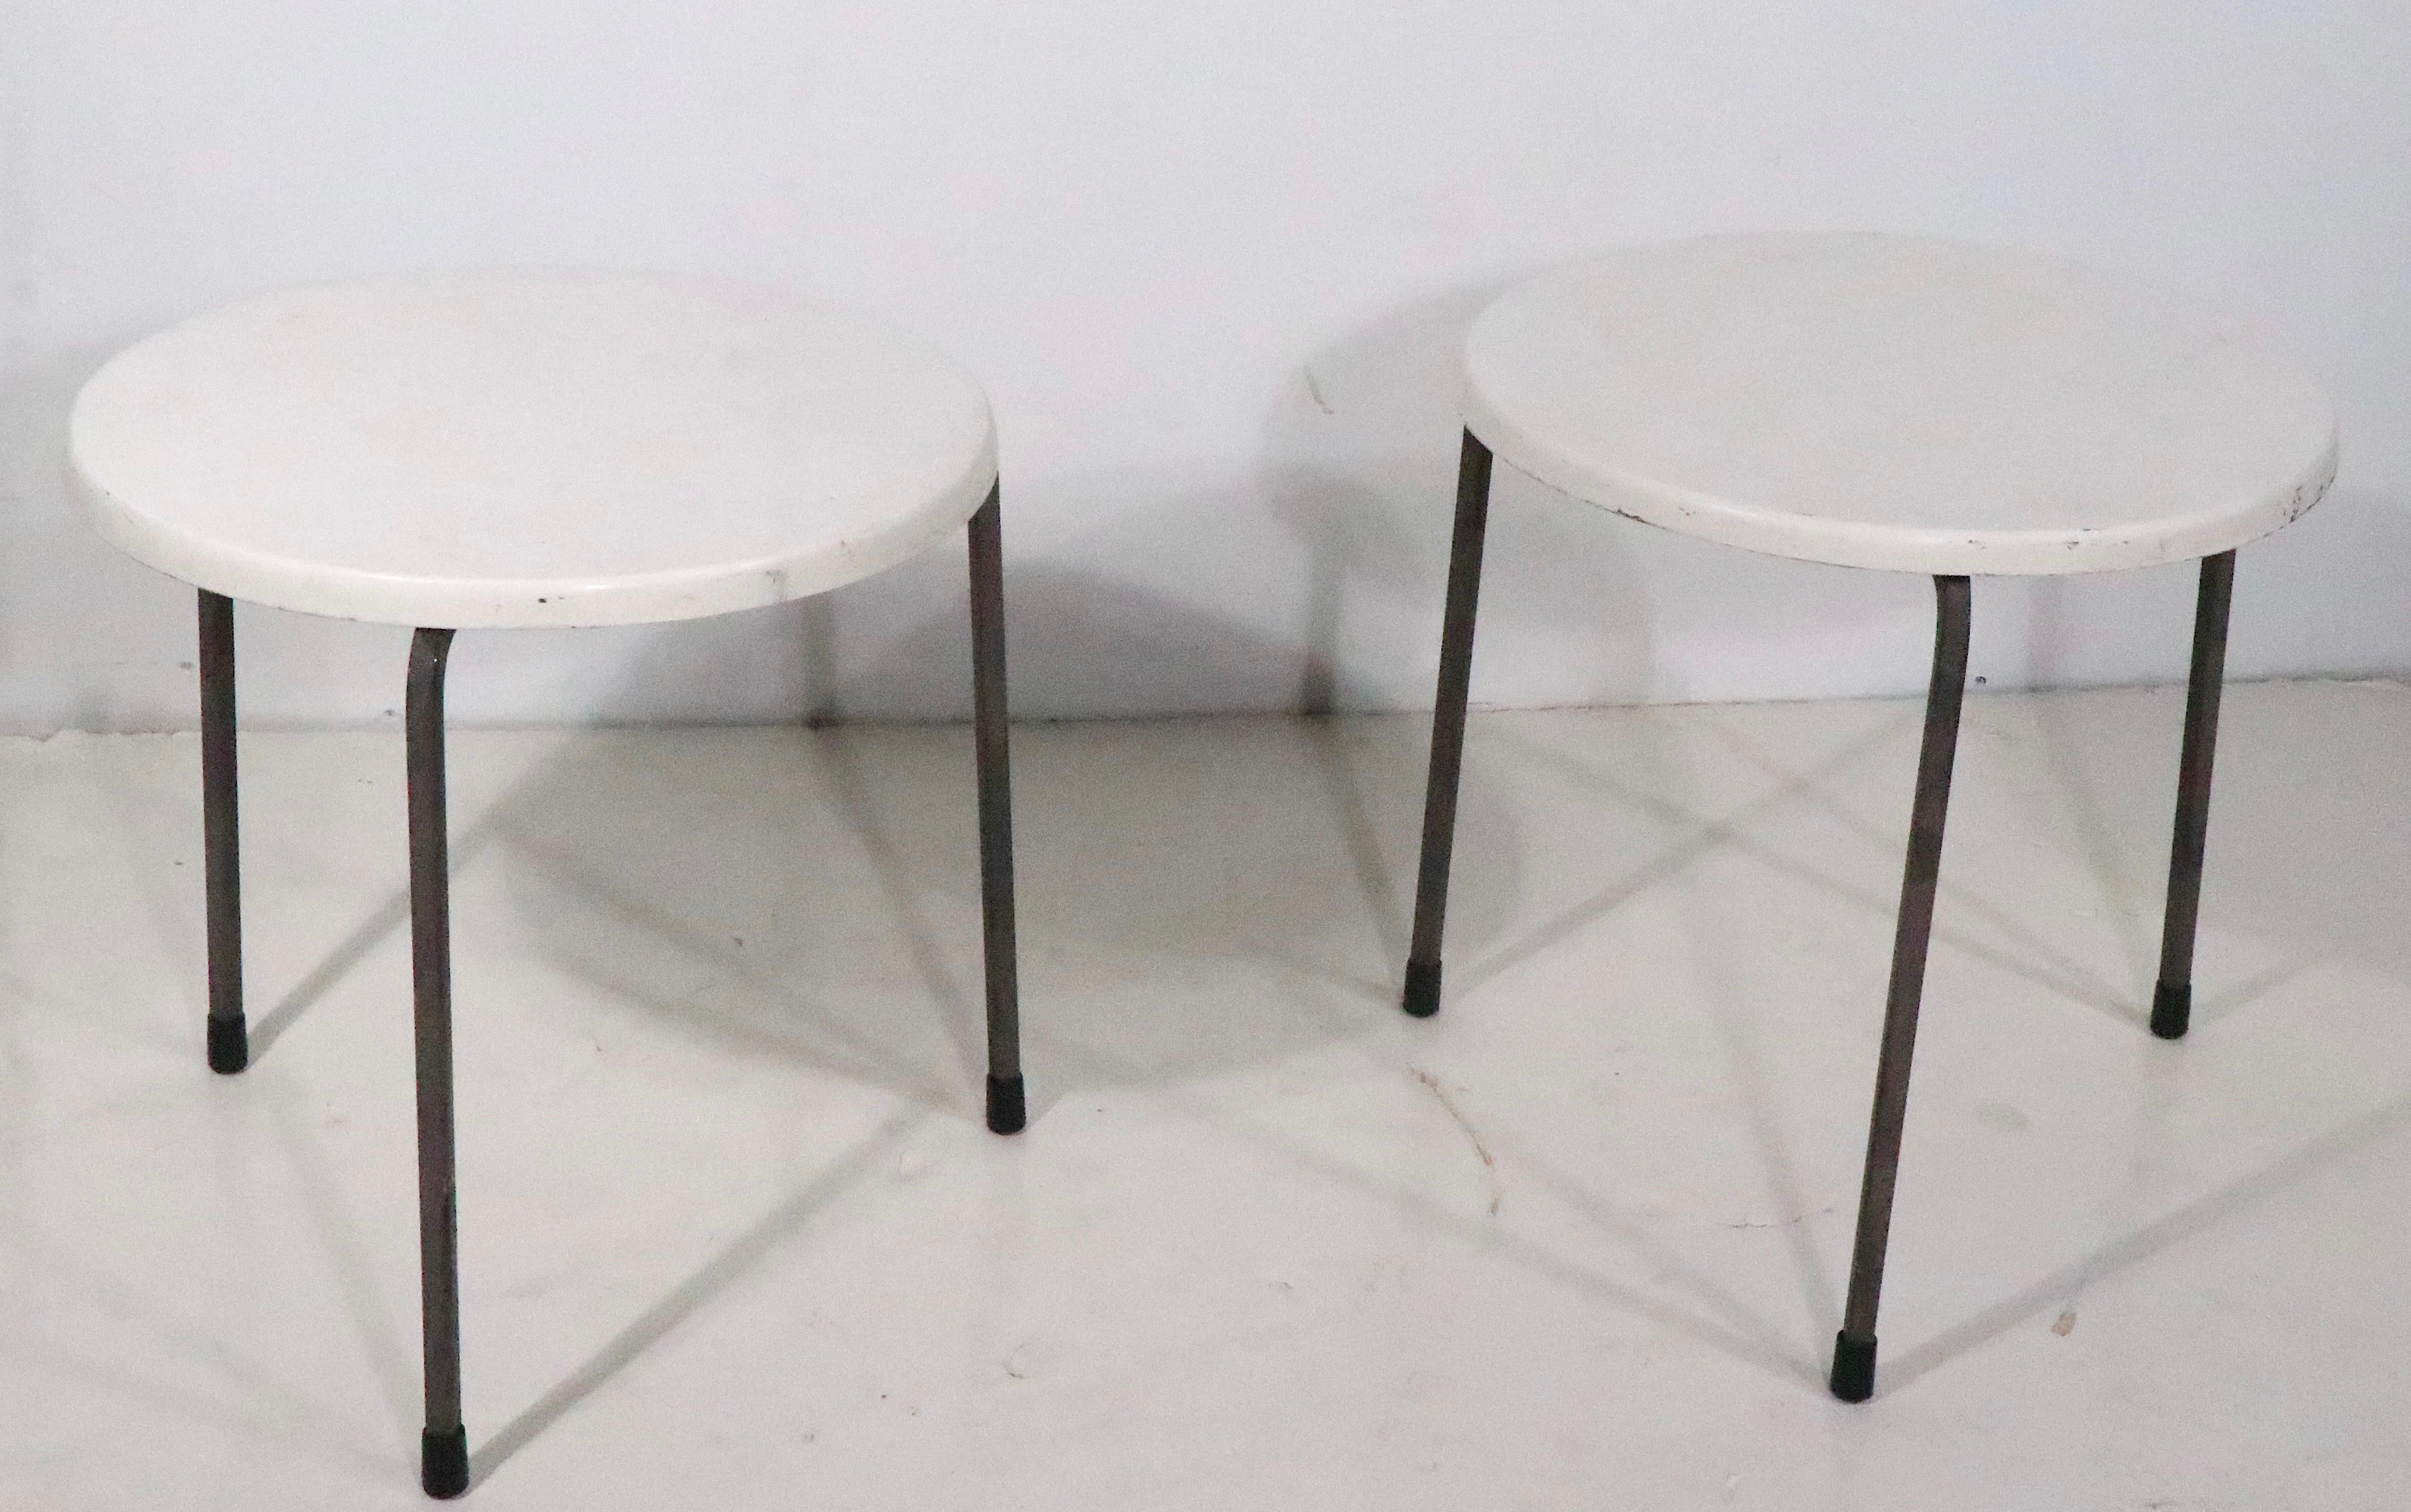 Wrought Iron Pr.  Mid Century Patio Poolside Tables by Fibreform Made in Florida c.1950/1970s For Sale